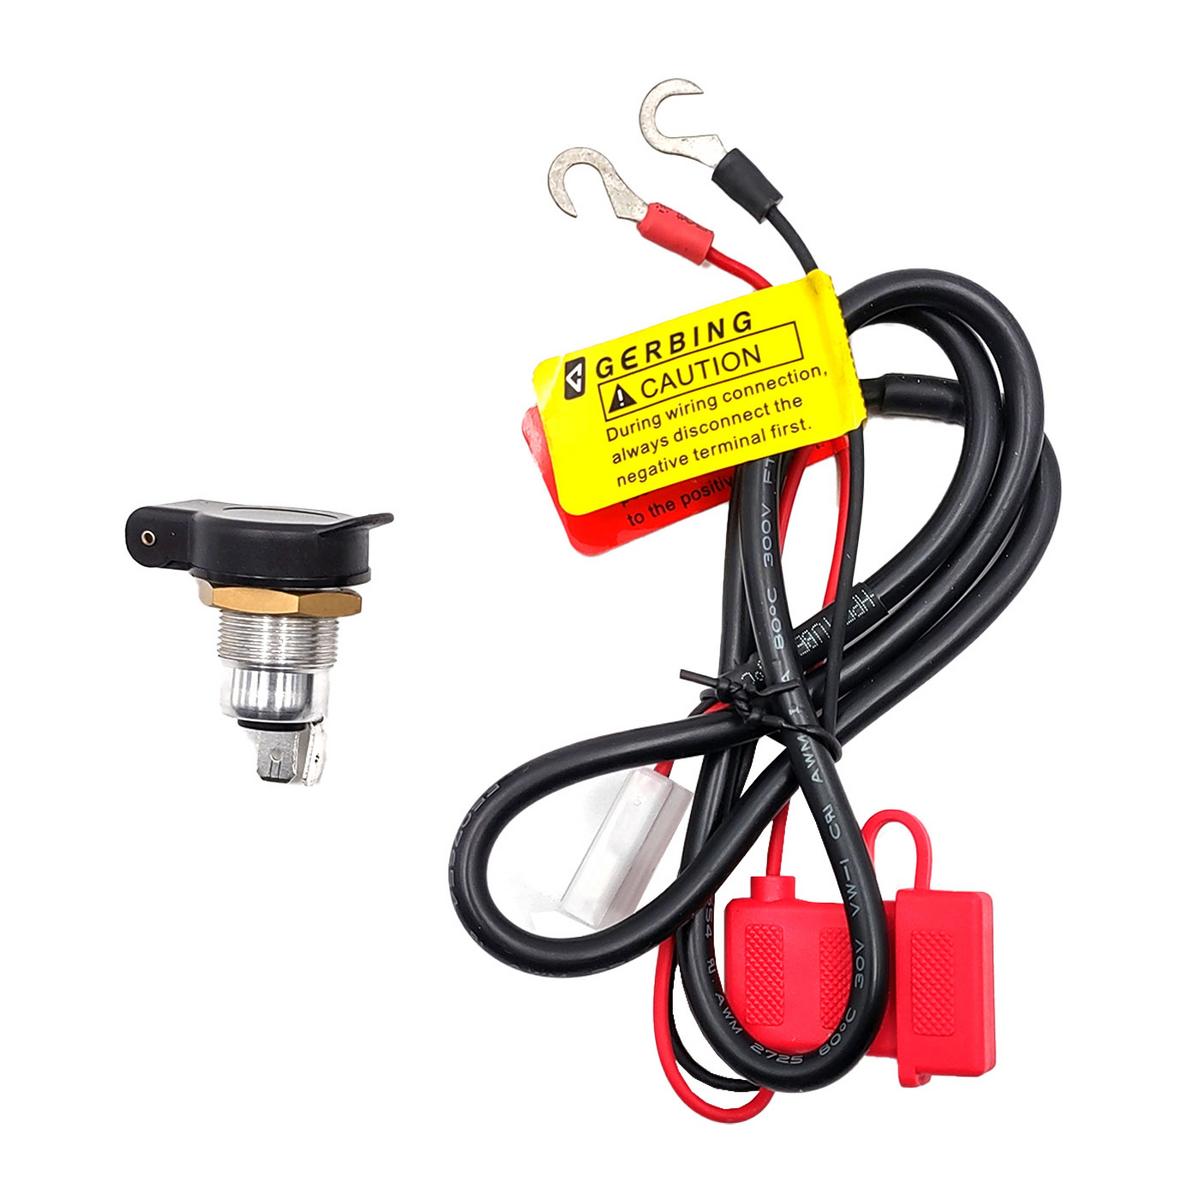 12V Heated Jacket Wire Cigarette Lighter Plug For Heating Gears